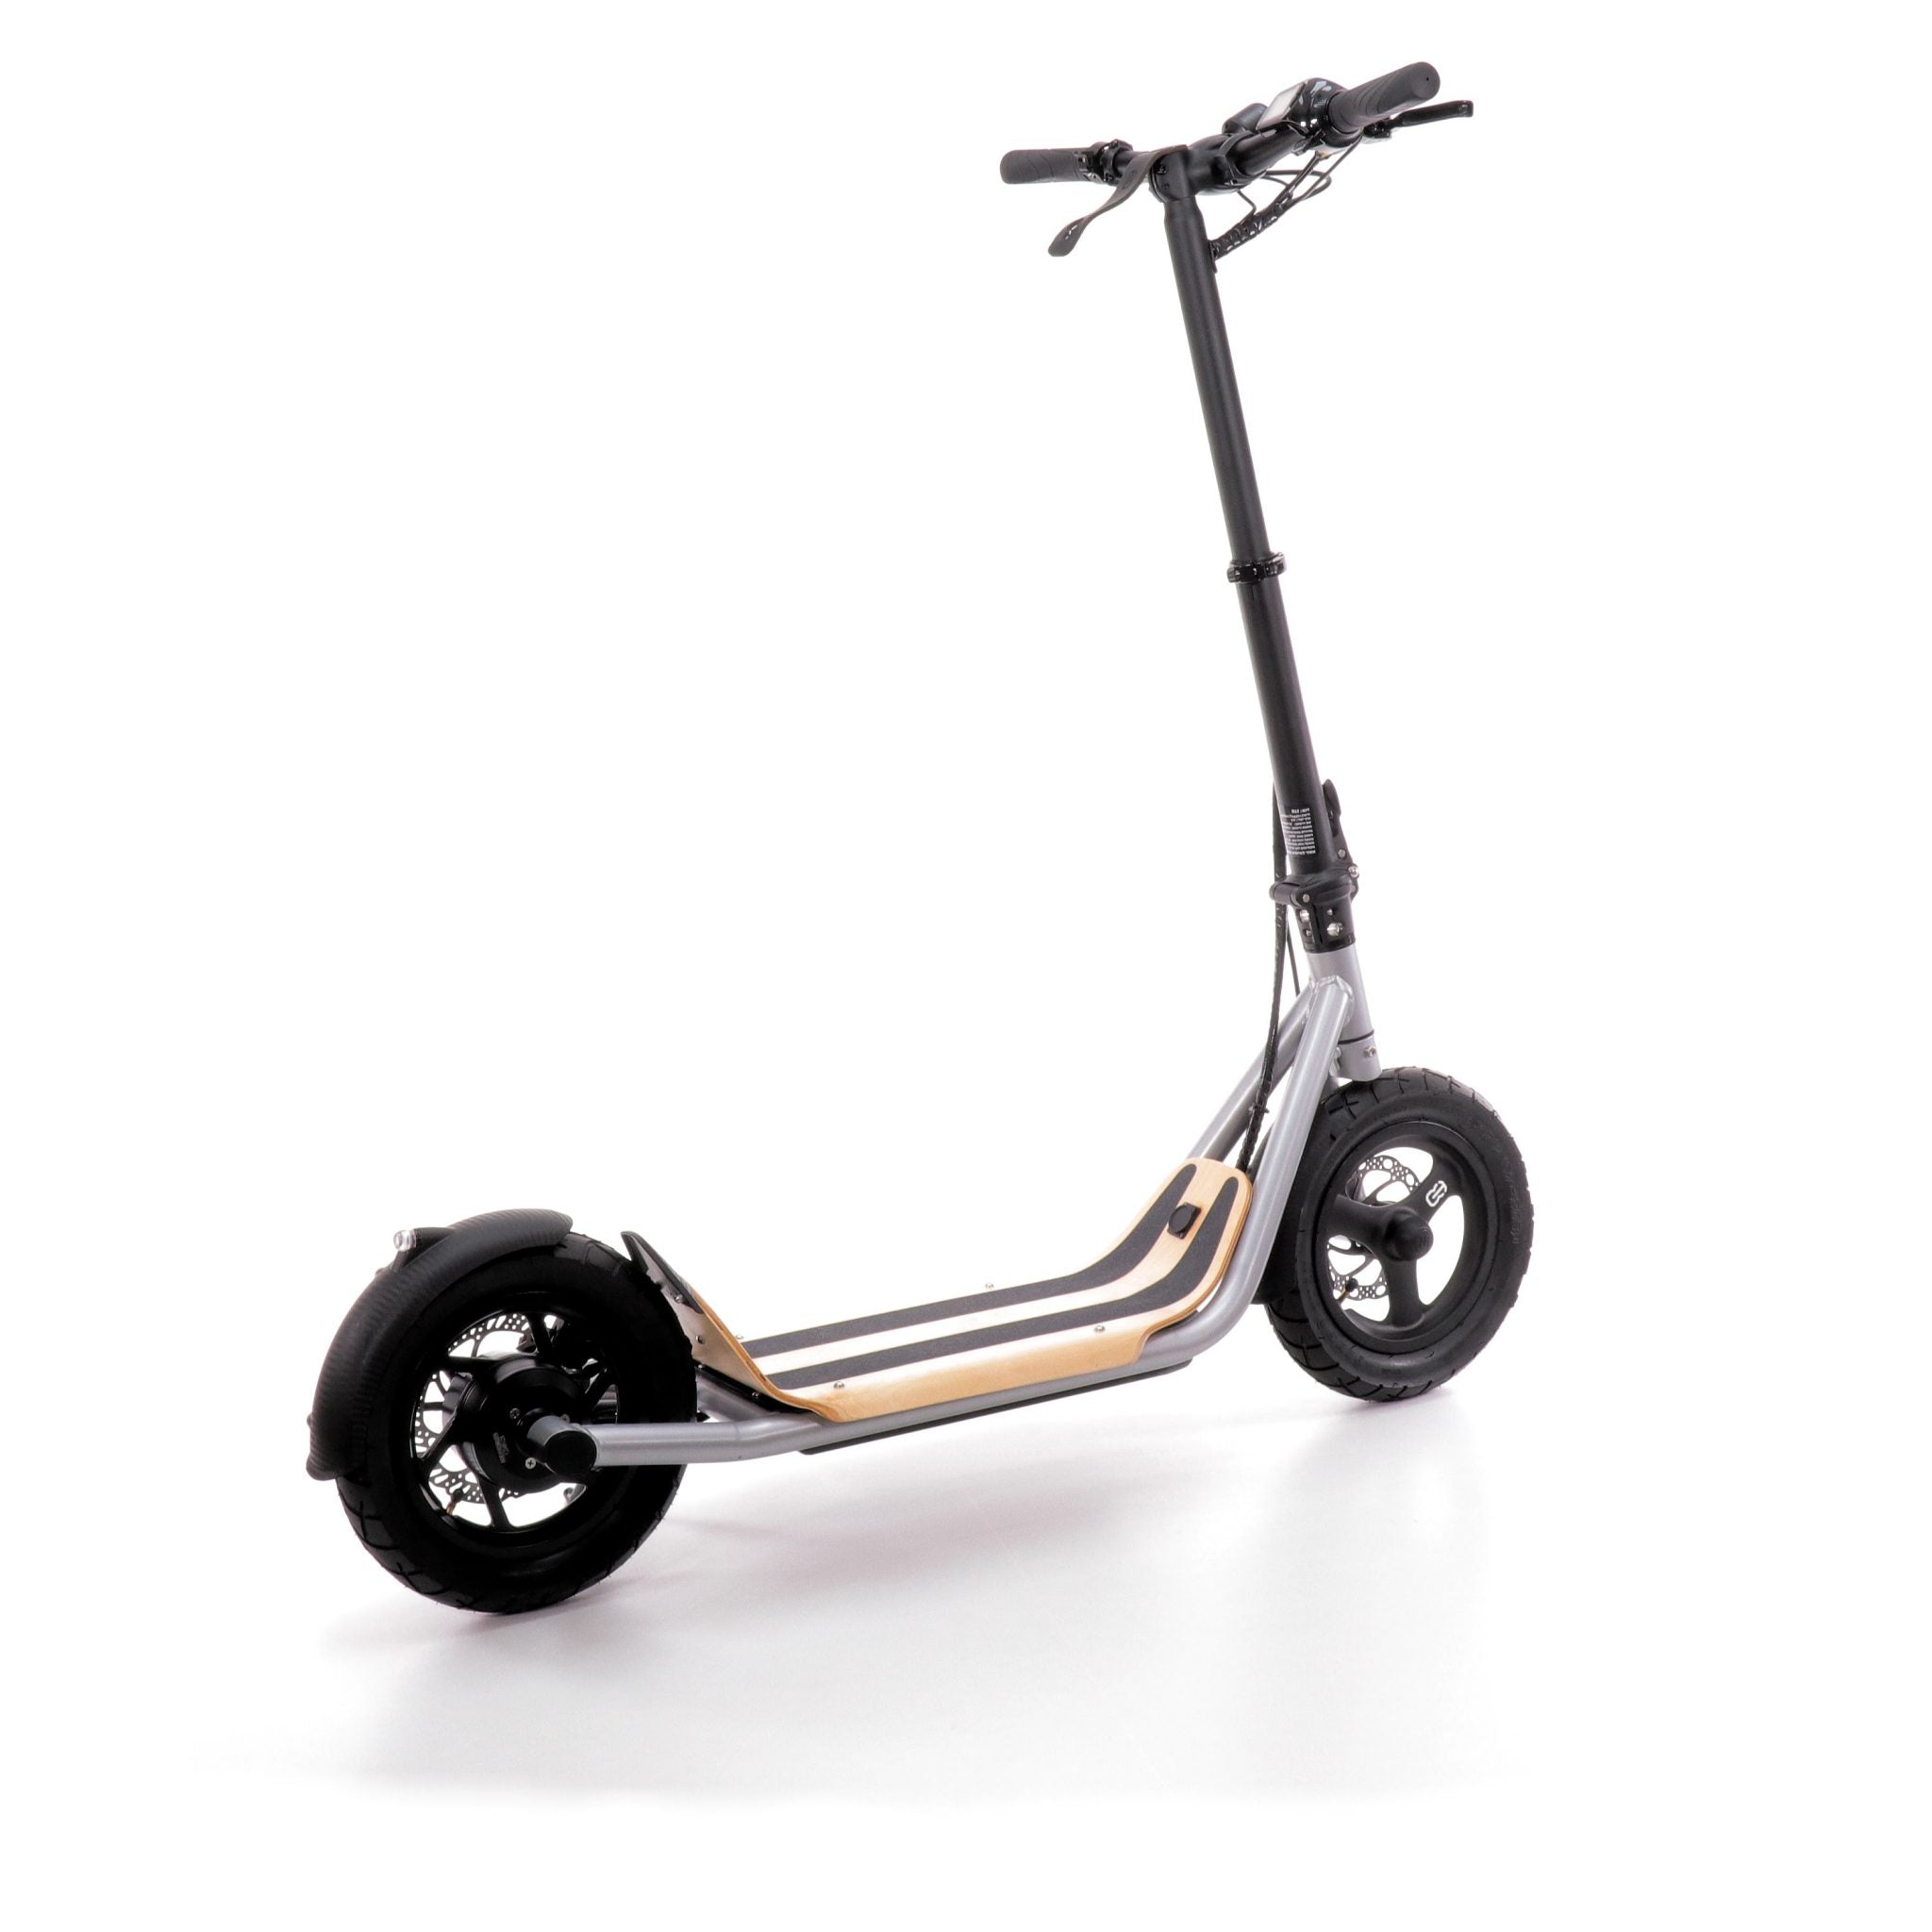 8Tev B12 Classic Electric Scooter